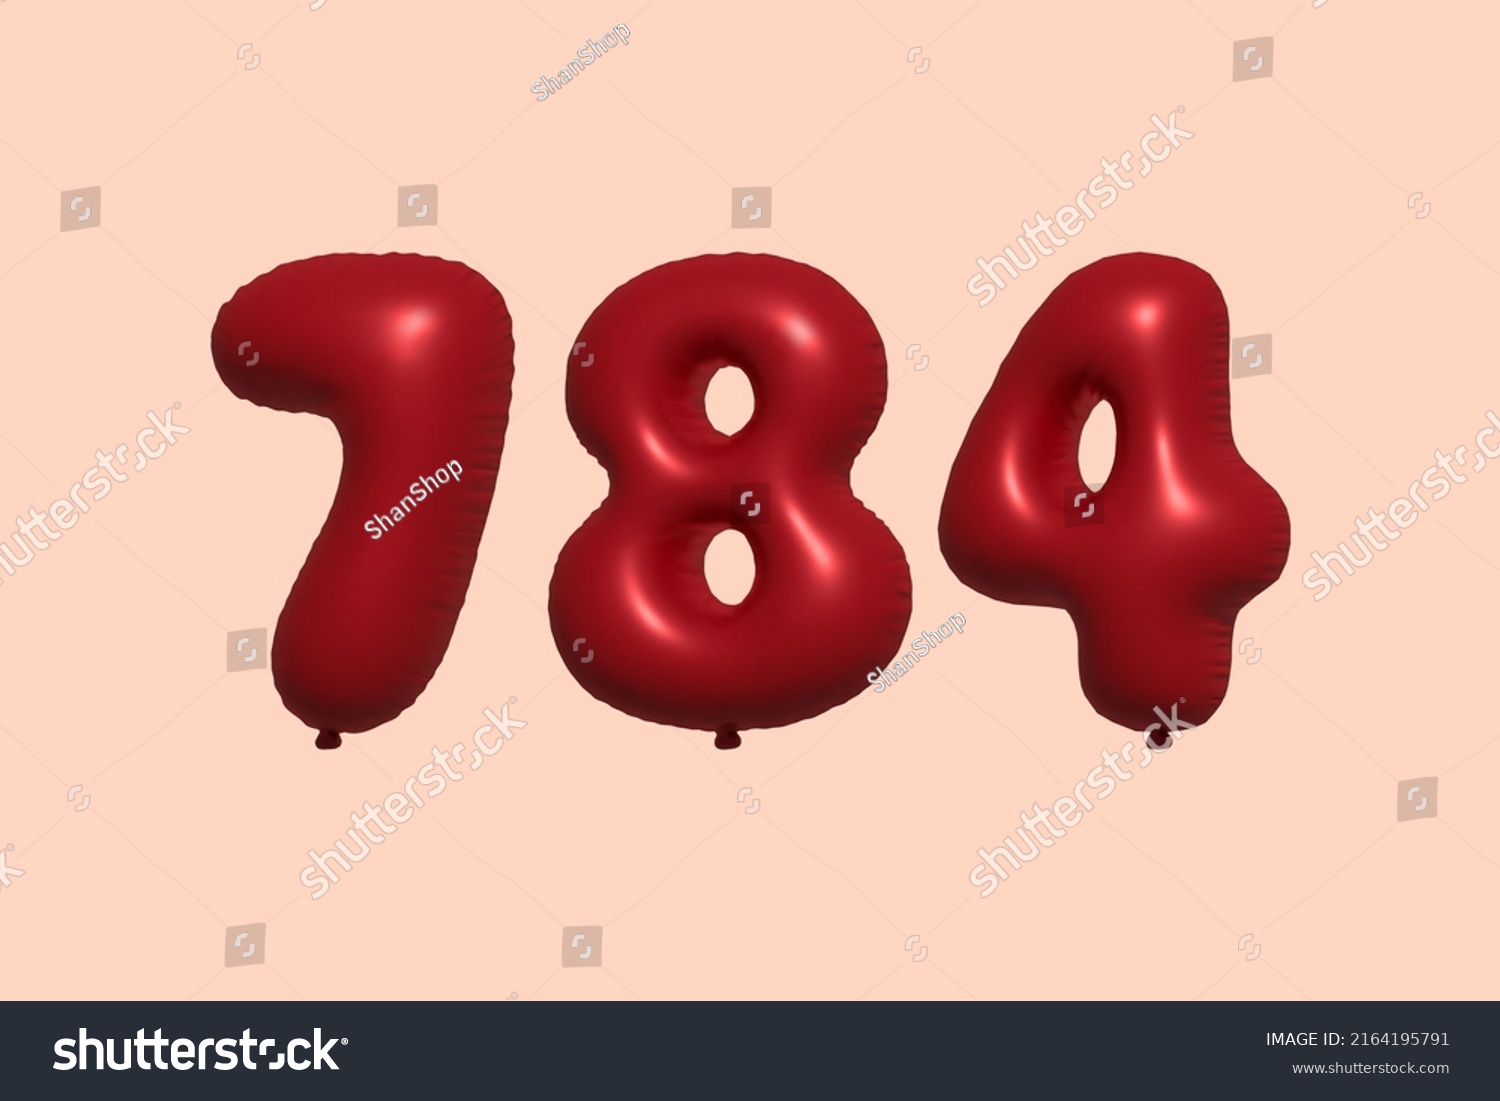 SVG of 784 3d number balloon made of realistic metallic air balloon 3d rendering. 3D Red helium balloons for sale decoration Party Birthday, Celebrate anniversary, Wedding Holiday. Vector illustration svg